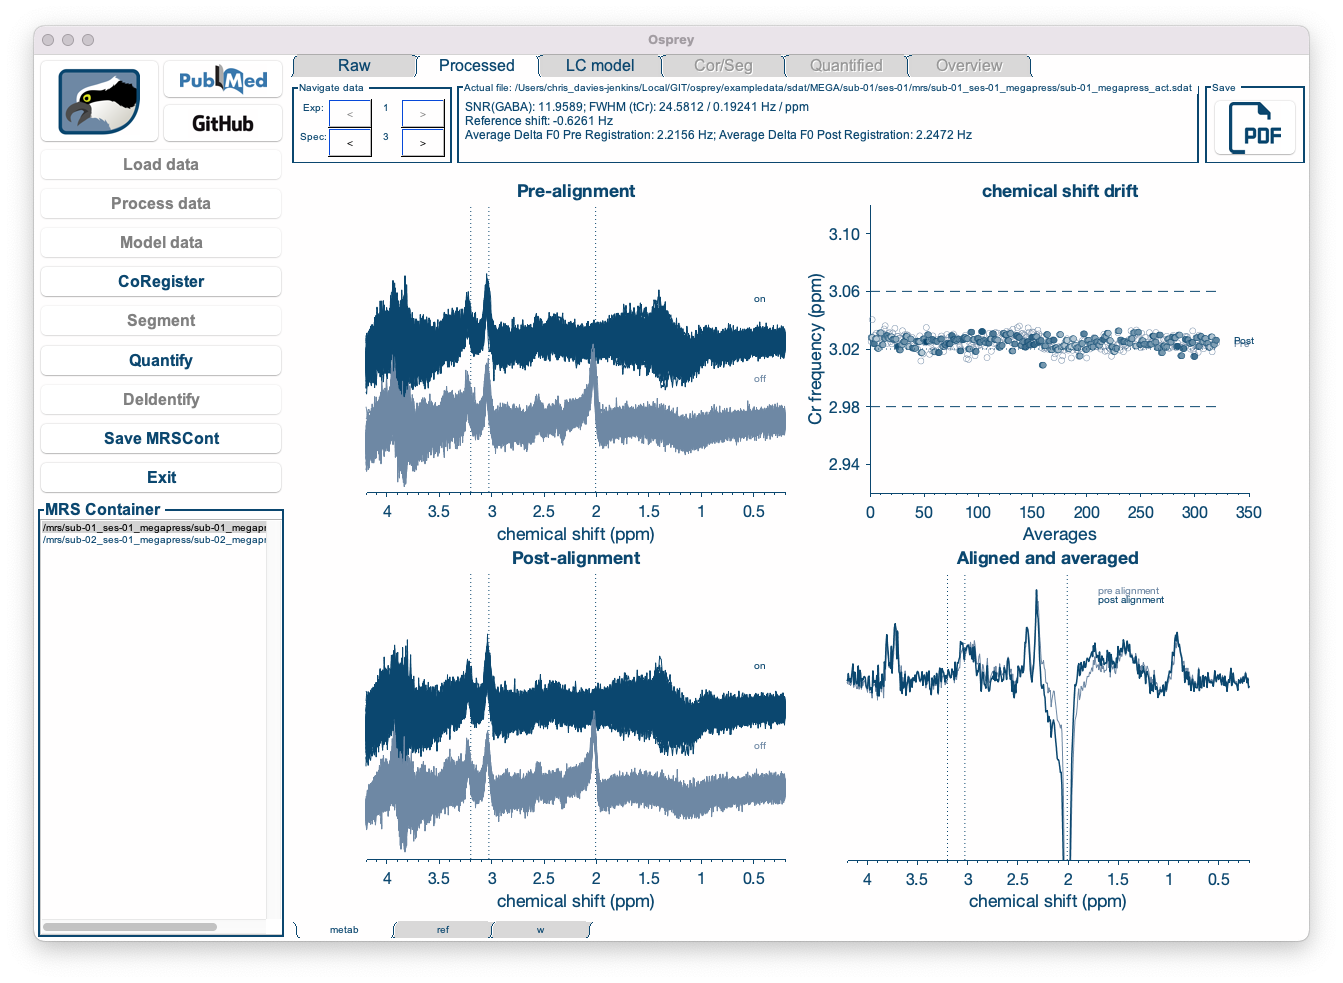 Different sub-spectra can be visualized by cycling through the "Spec" windows.